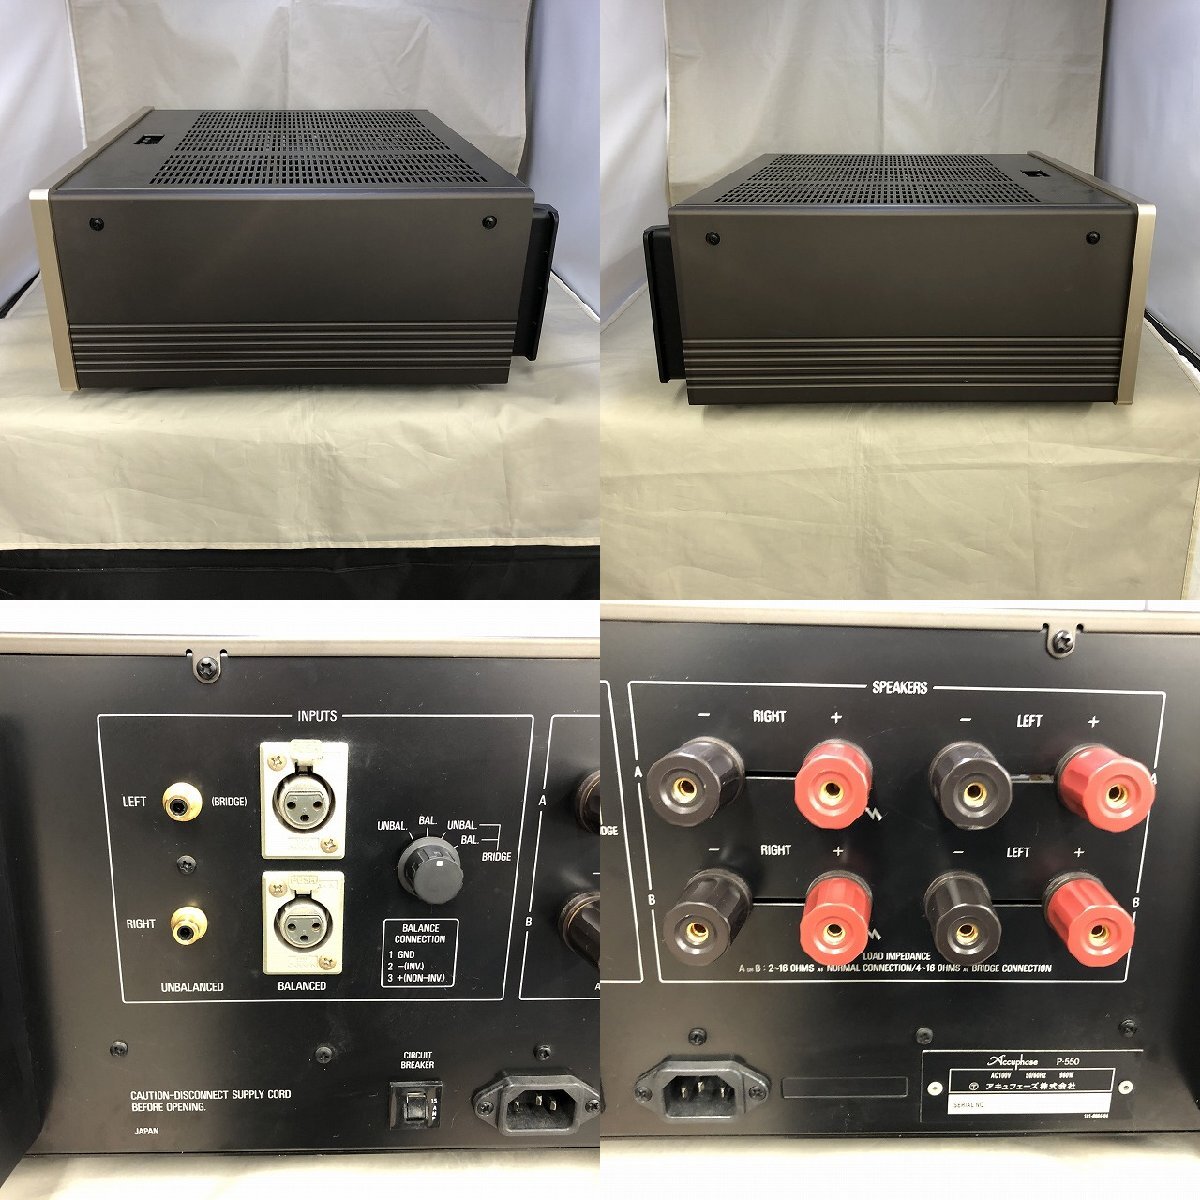 [ direct pick up commodity ] Accuphase( Accuphase ) P-550 power amplifier (046109)